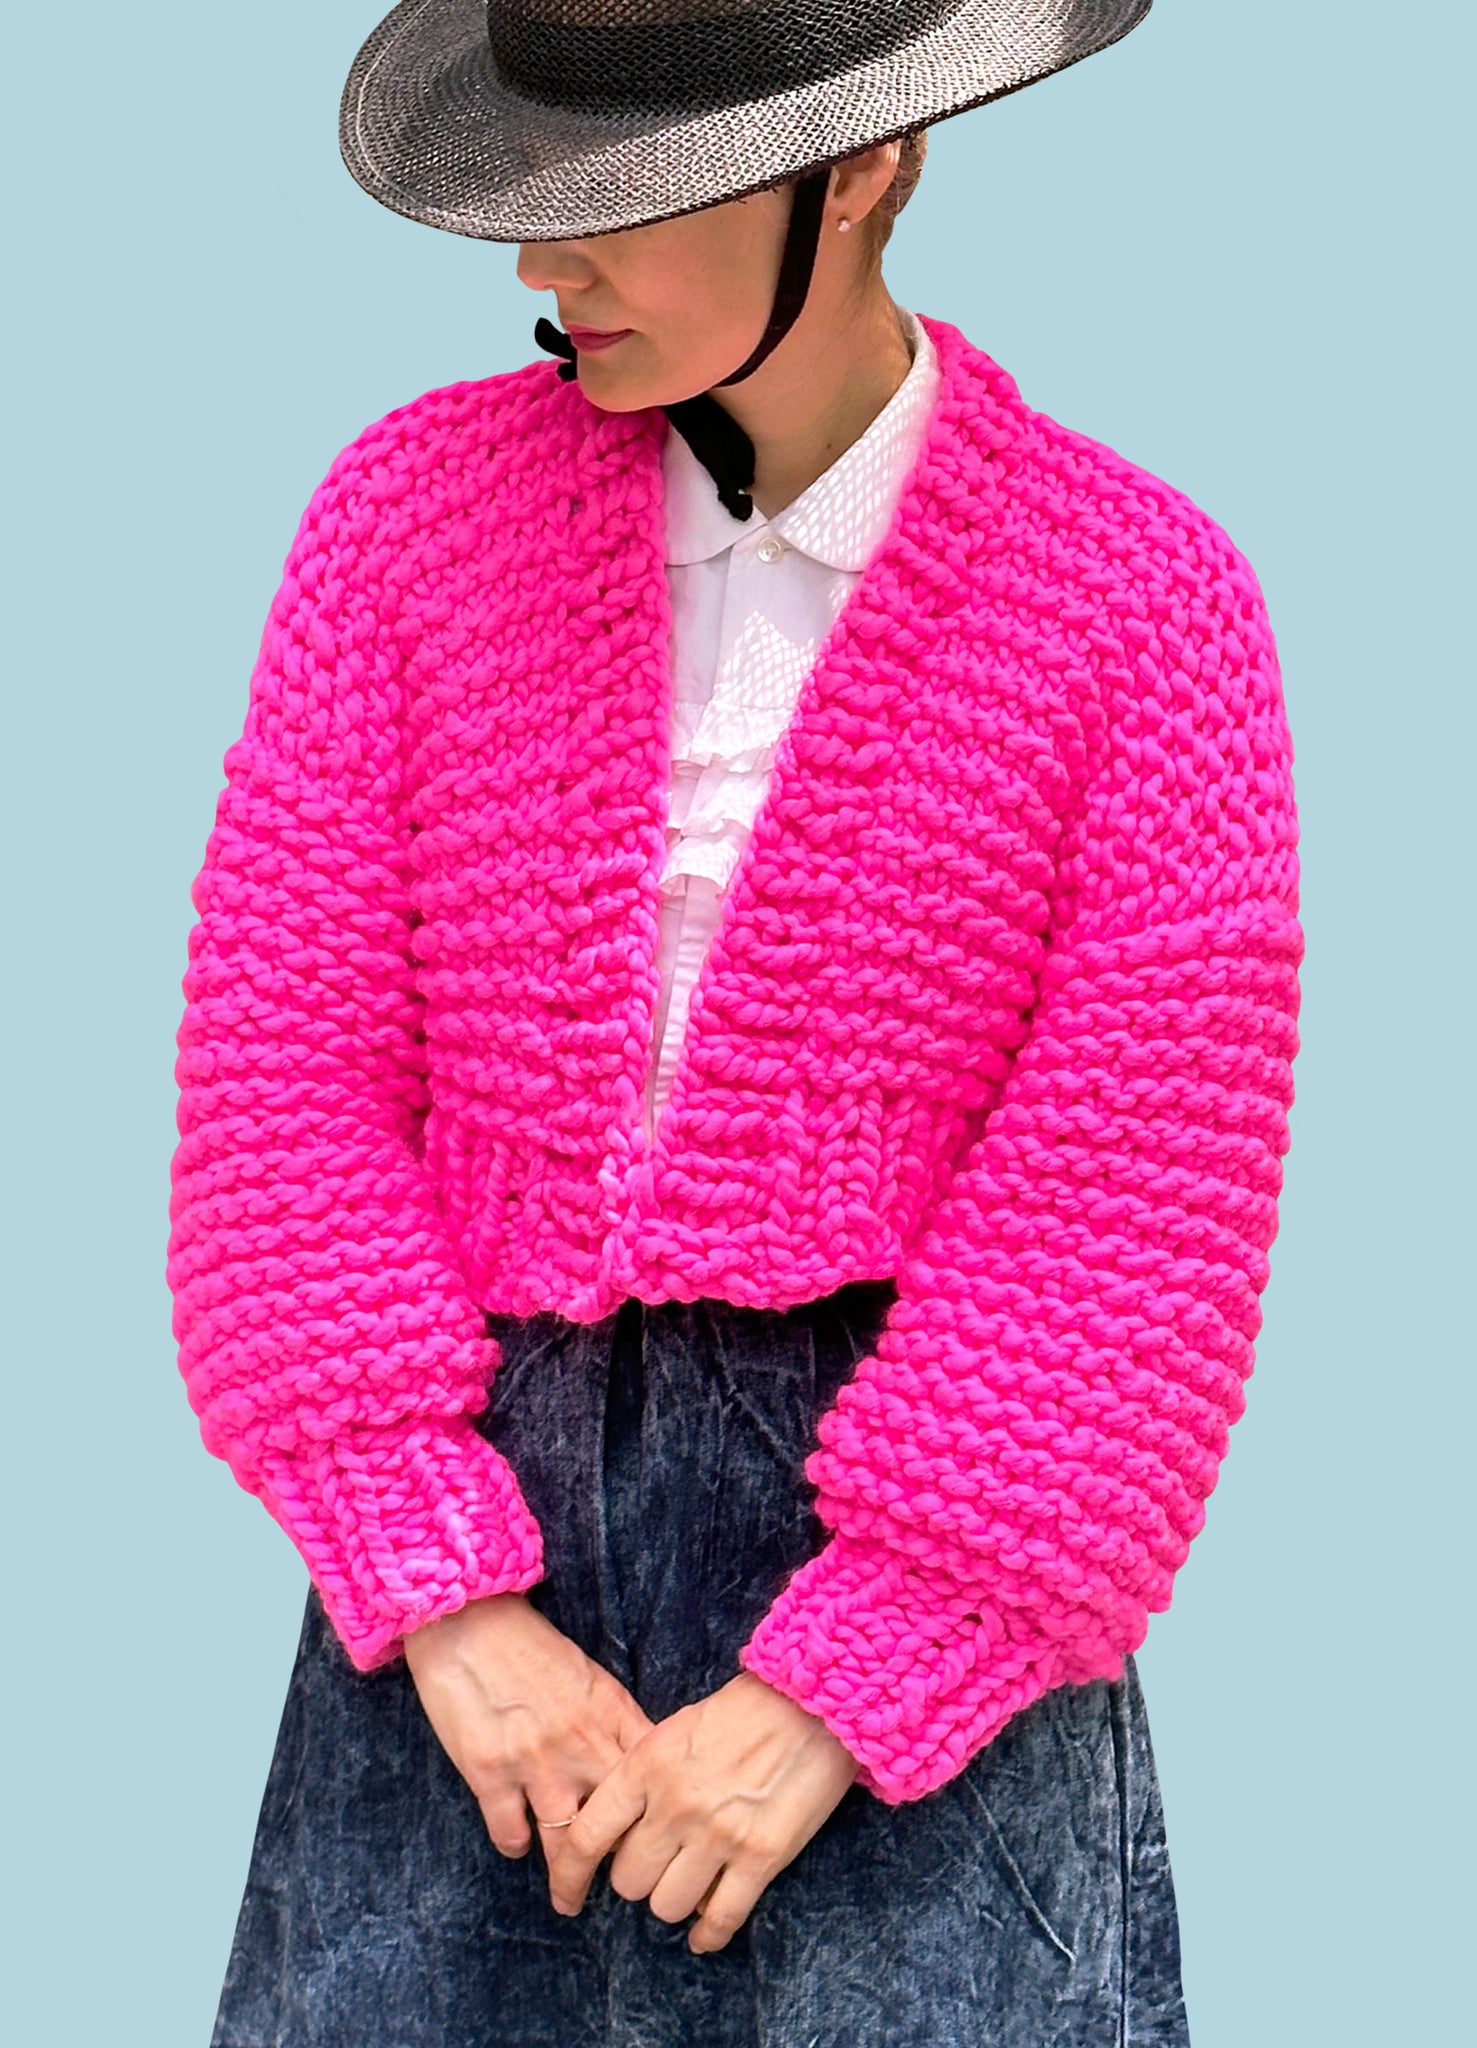 Free knitting pattern: Knit your first sweater | Digital Download – Loopy  Mango